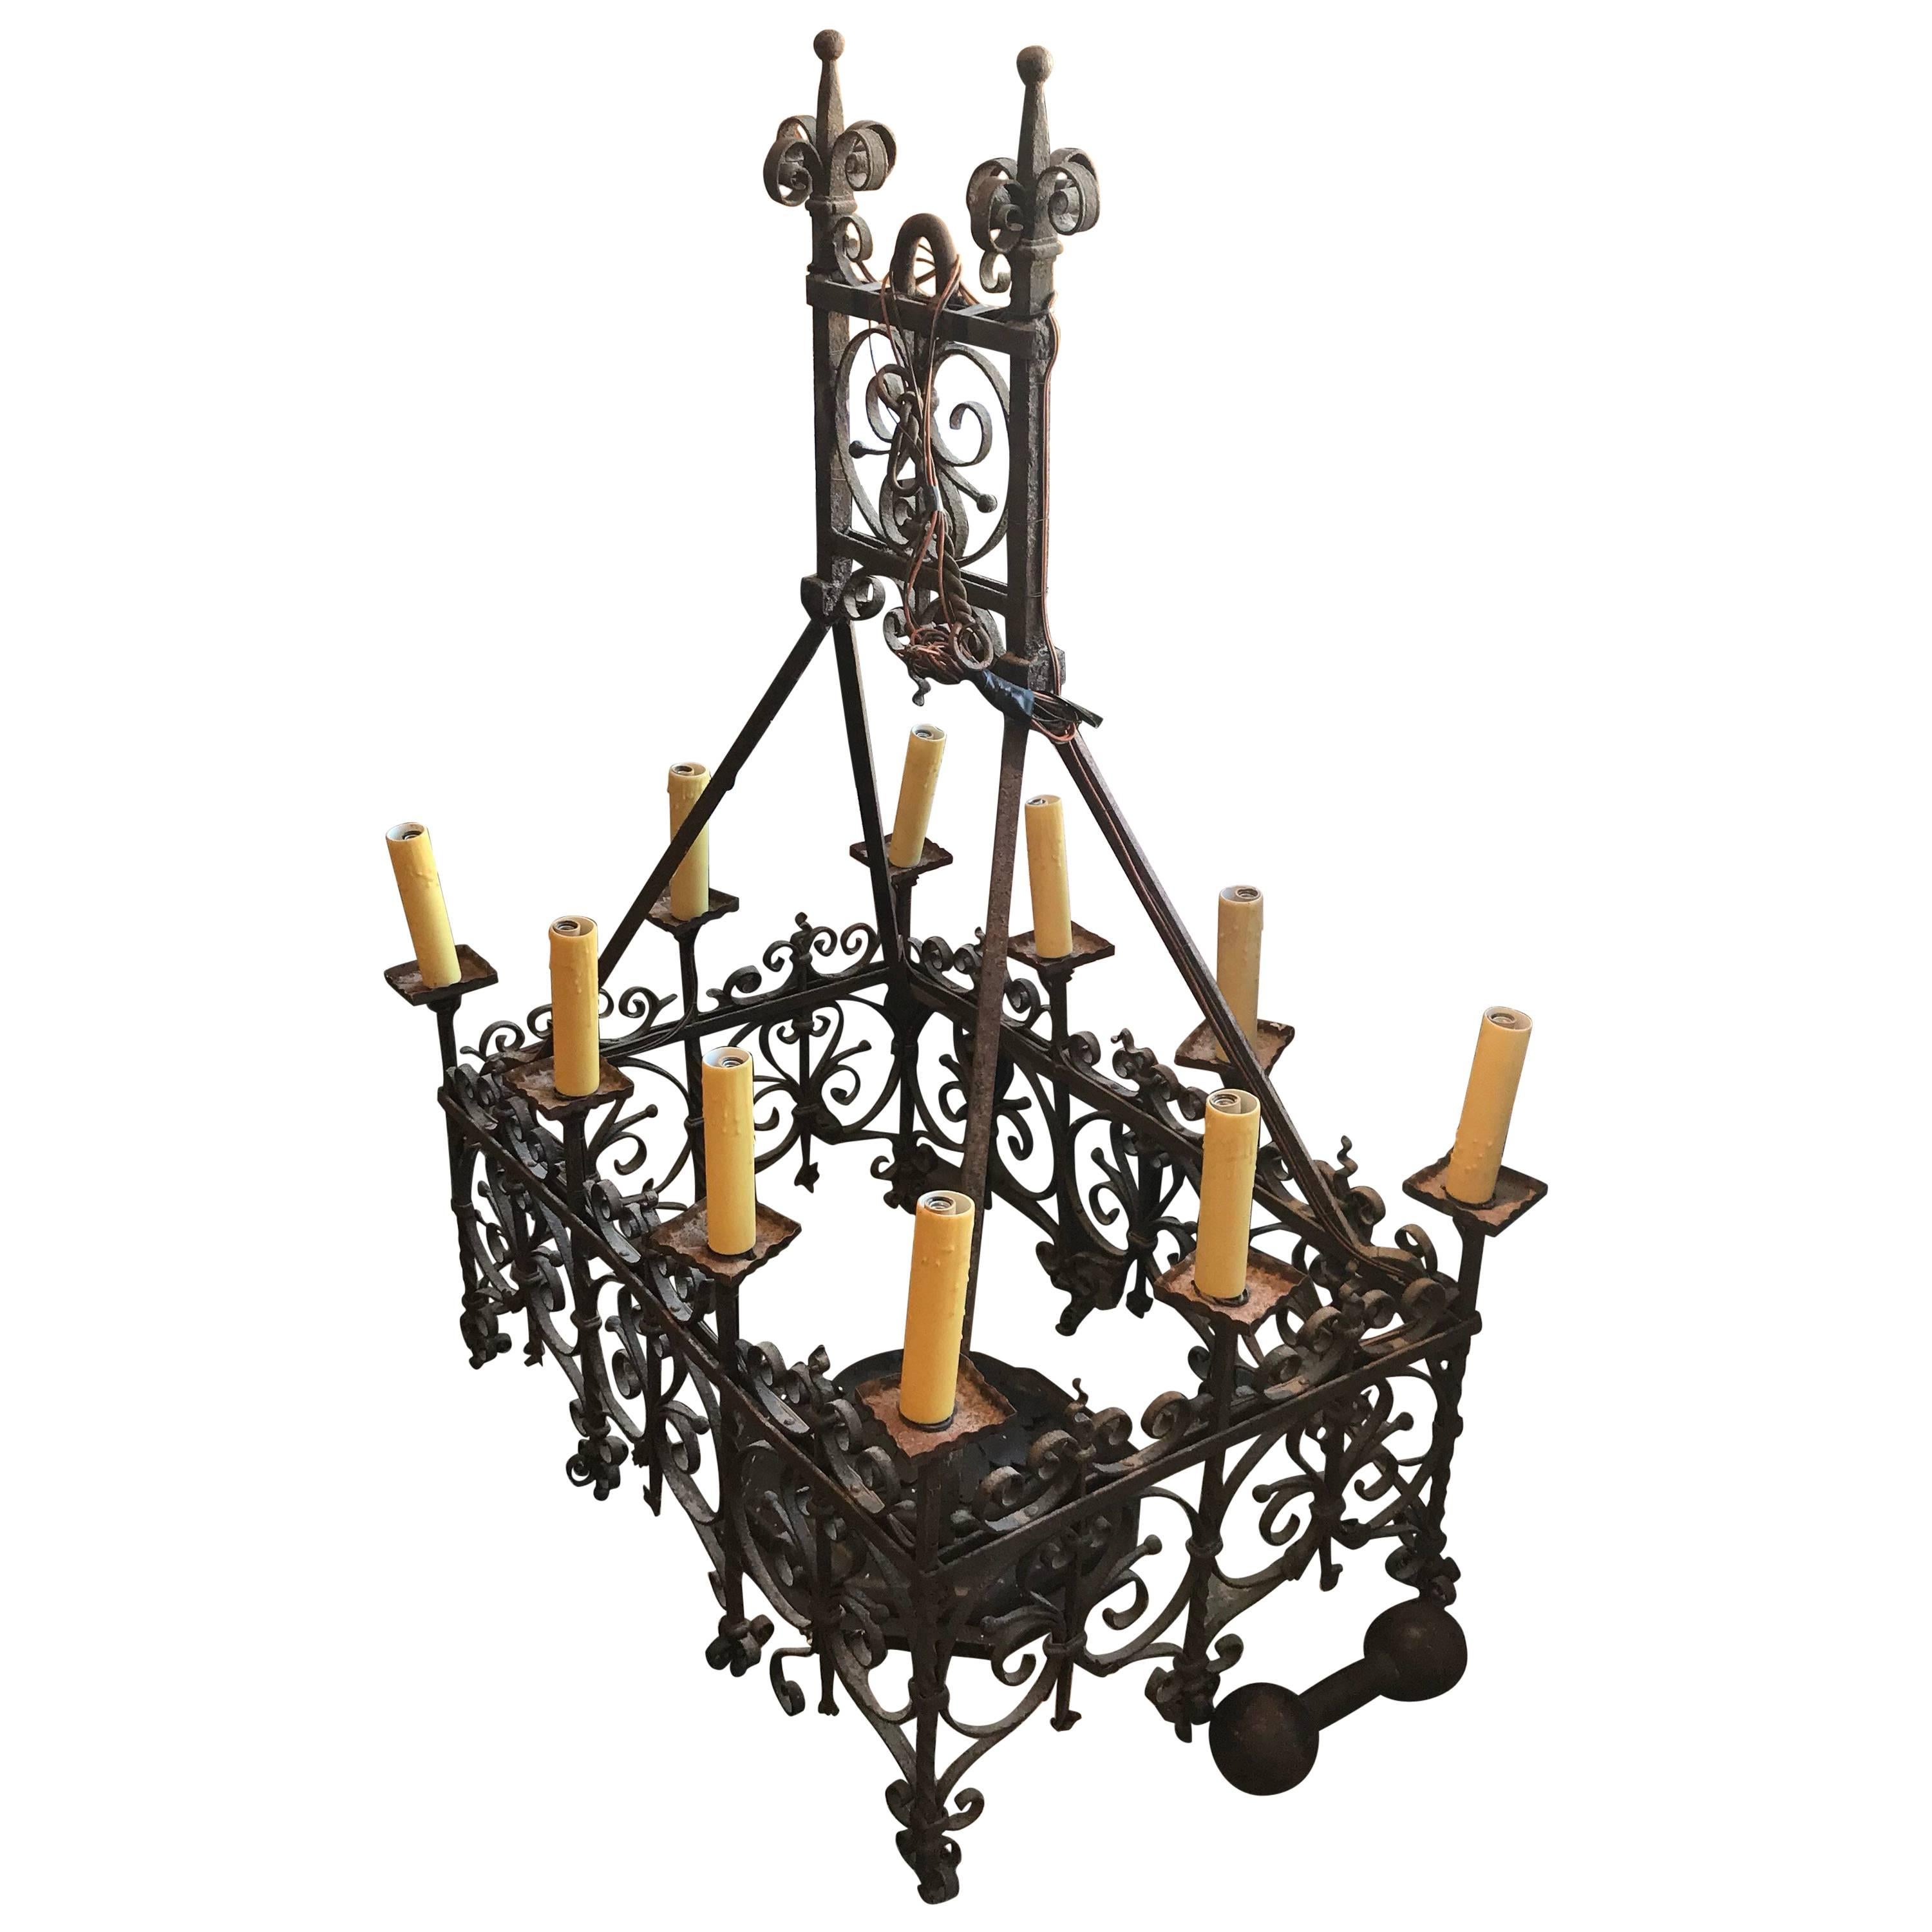 Wonderful 18th century Spanish or French wrought iron chandelier. Wonderfully hand bent wrought iron detailing. Originally was fitted for candles but has since been retrofitted to electricity. This a great example of an early european lighting